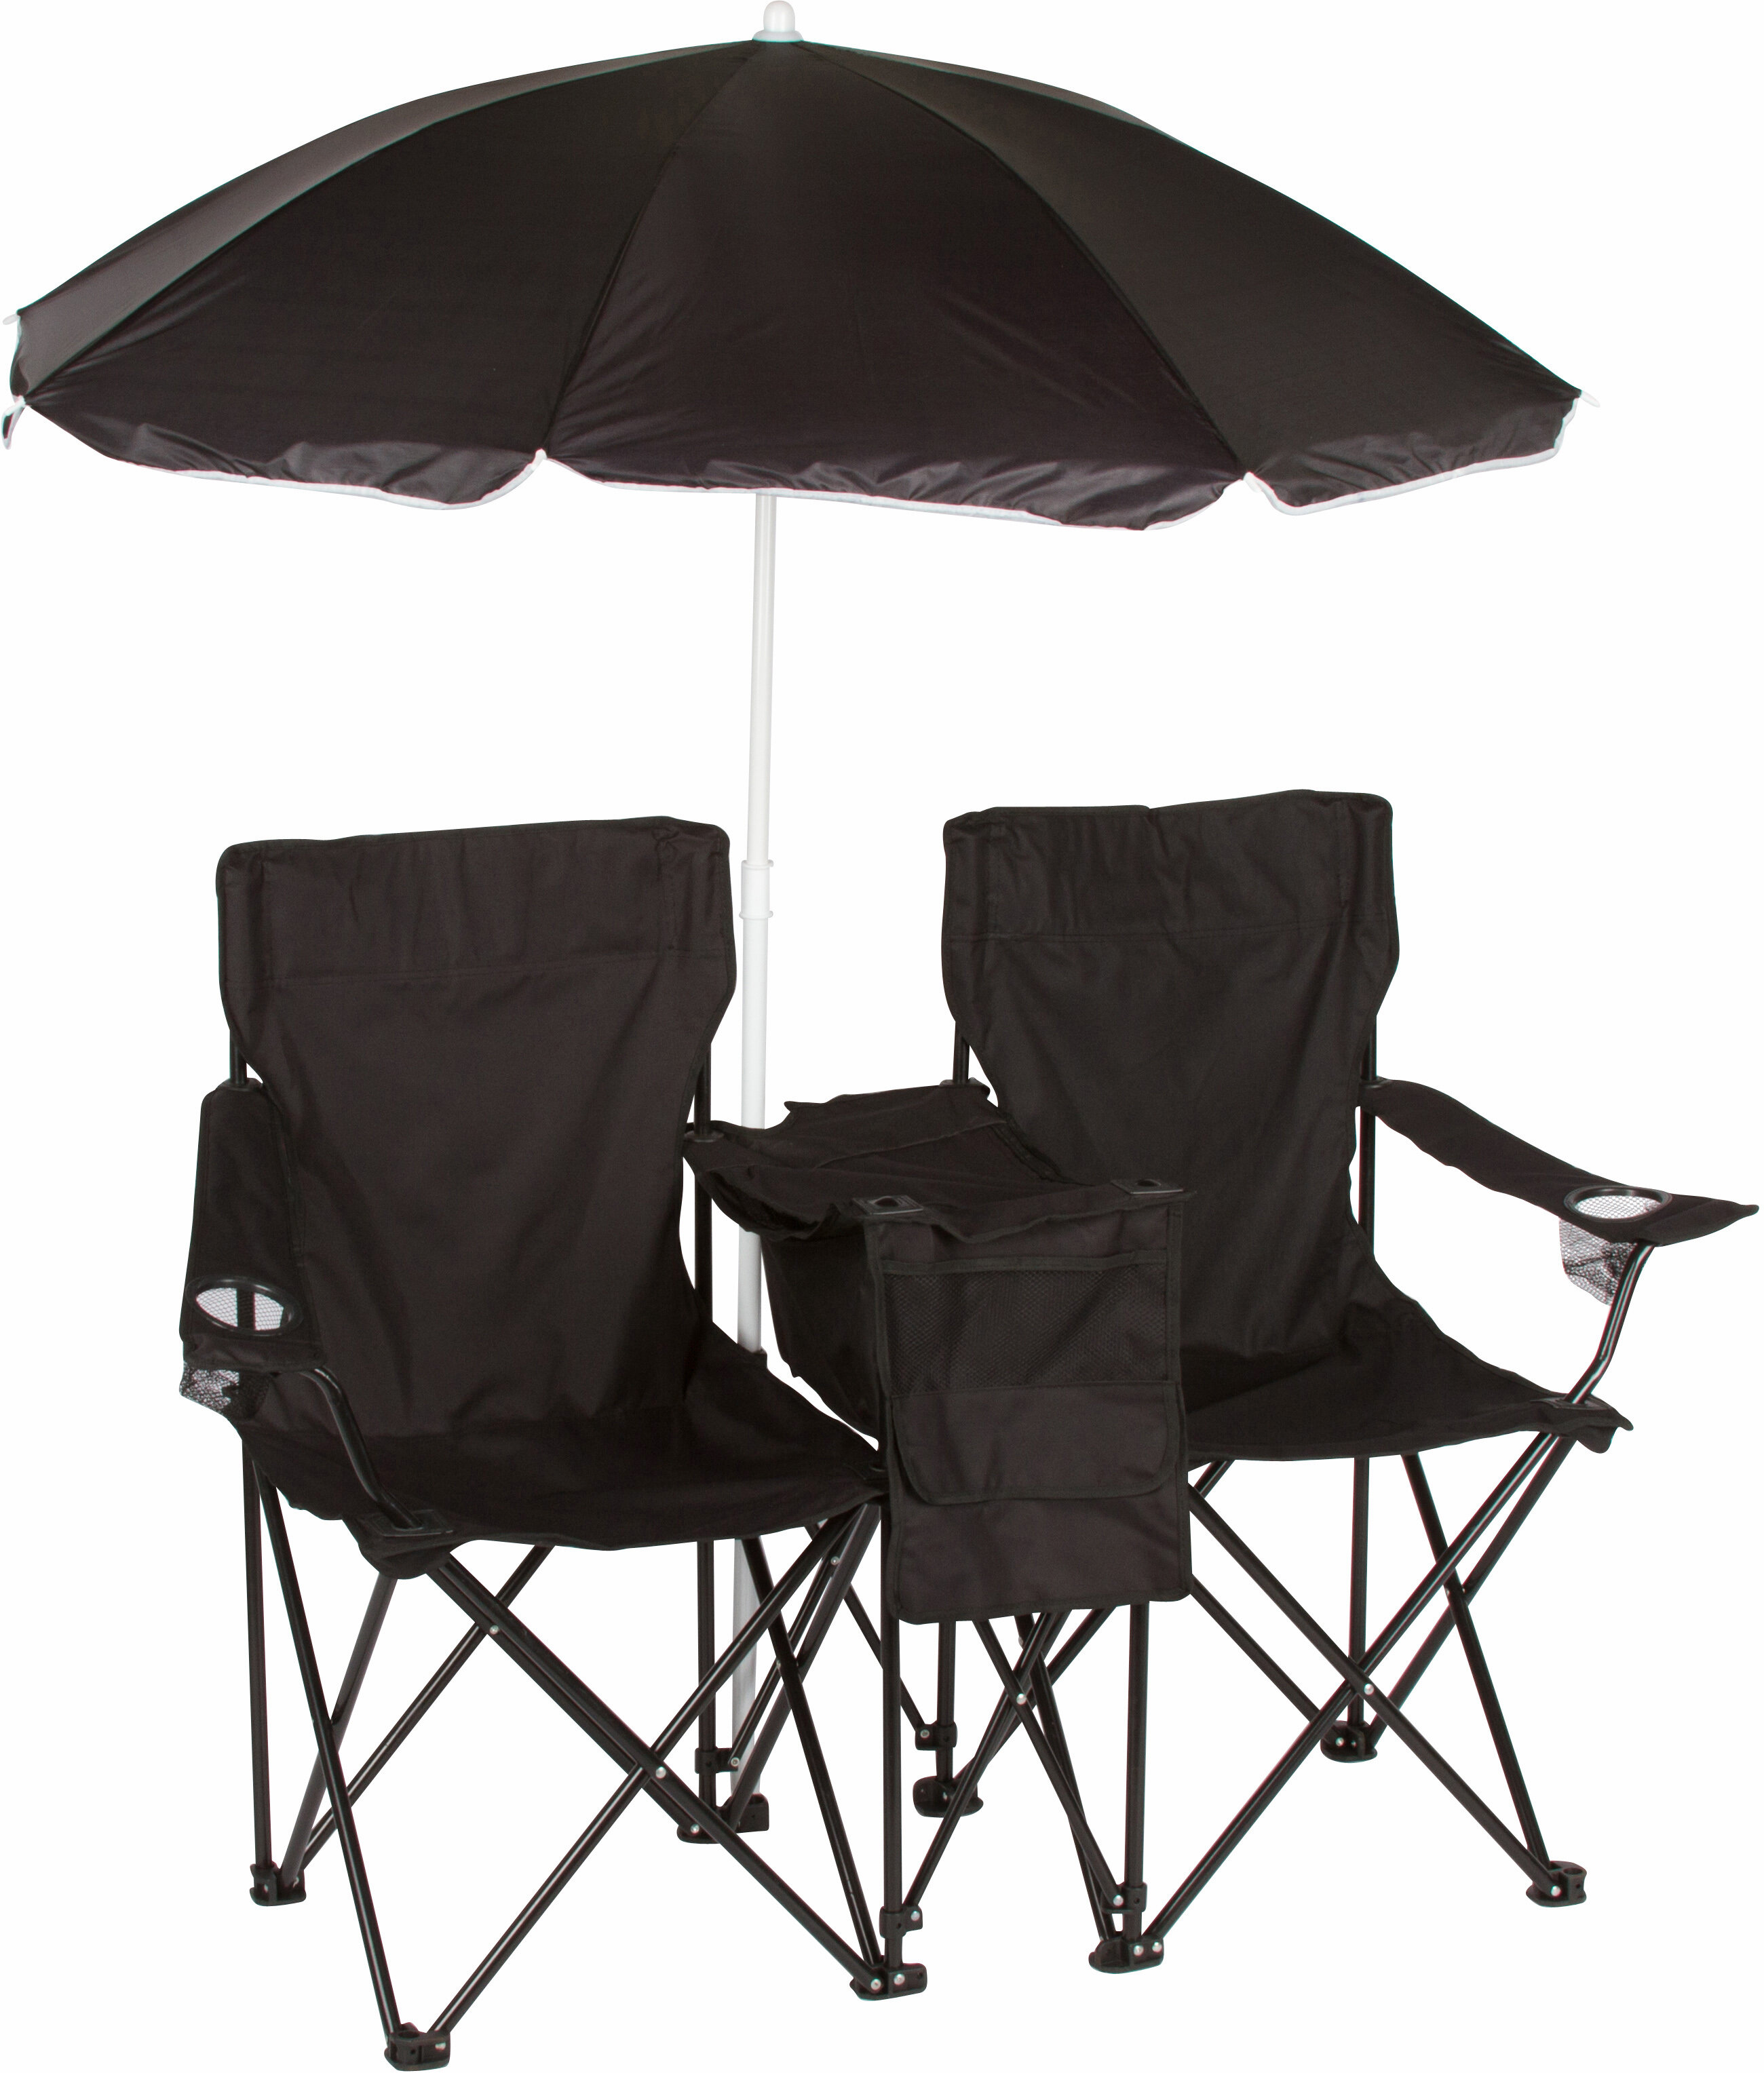 Foldable Picnic Beach Camping Double Chair+Umbrella Table Cooler Fishing Fold Up